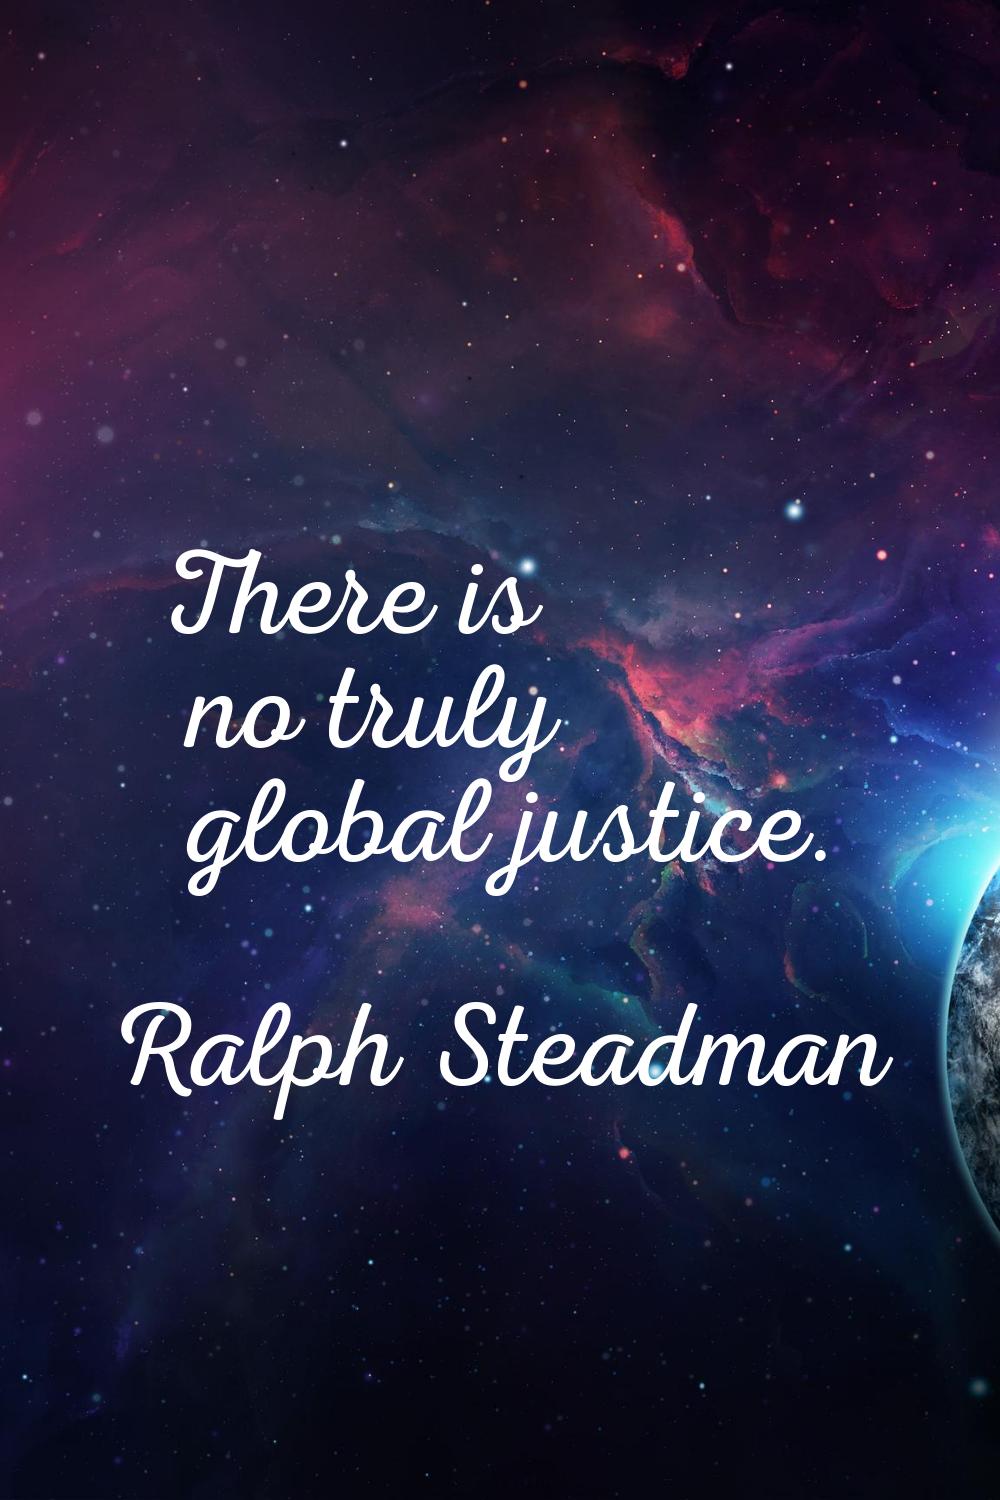 There is no truly global justice.